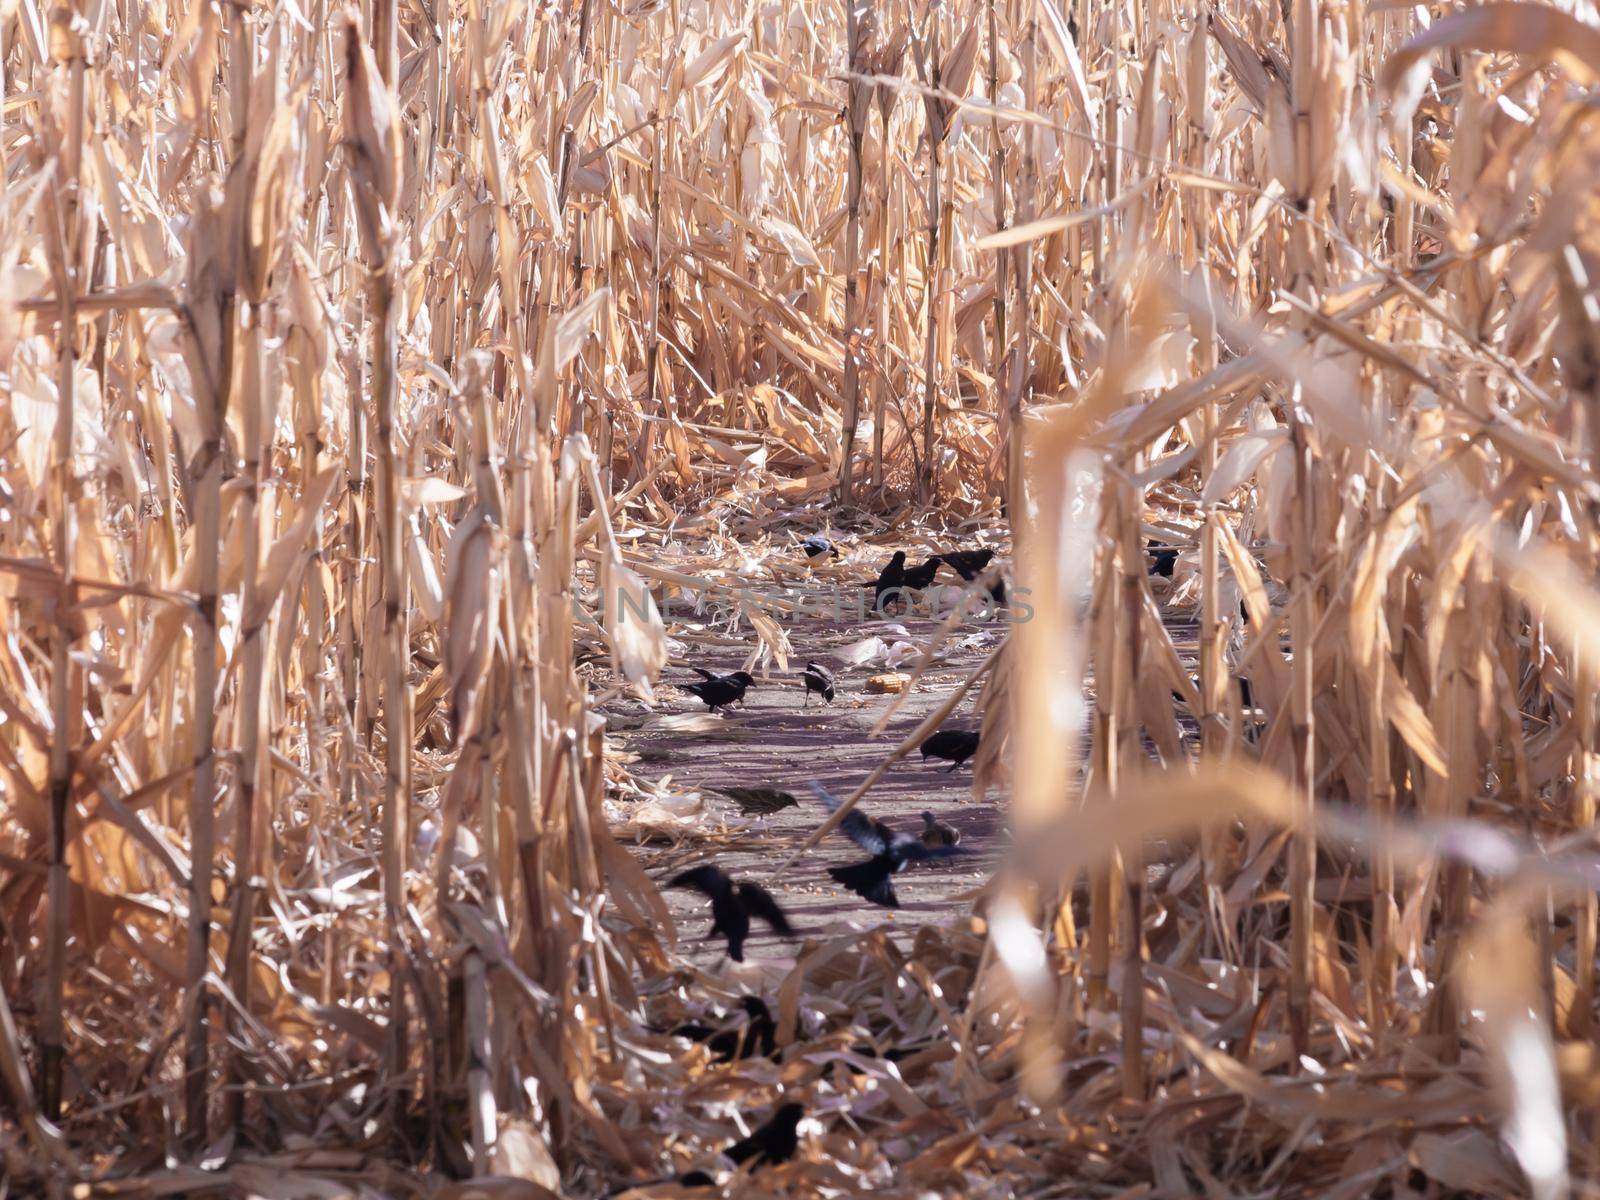 Crows eating in corn field in autumn.